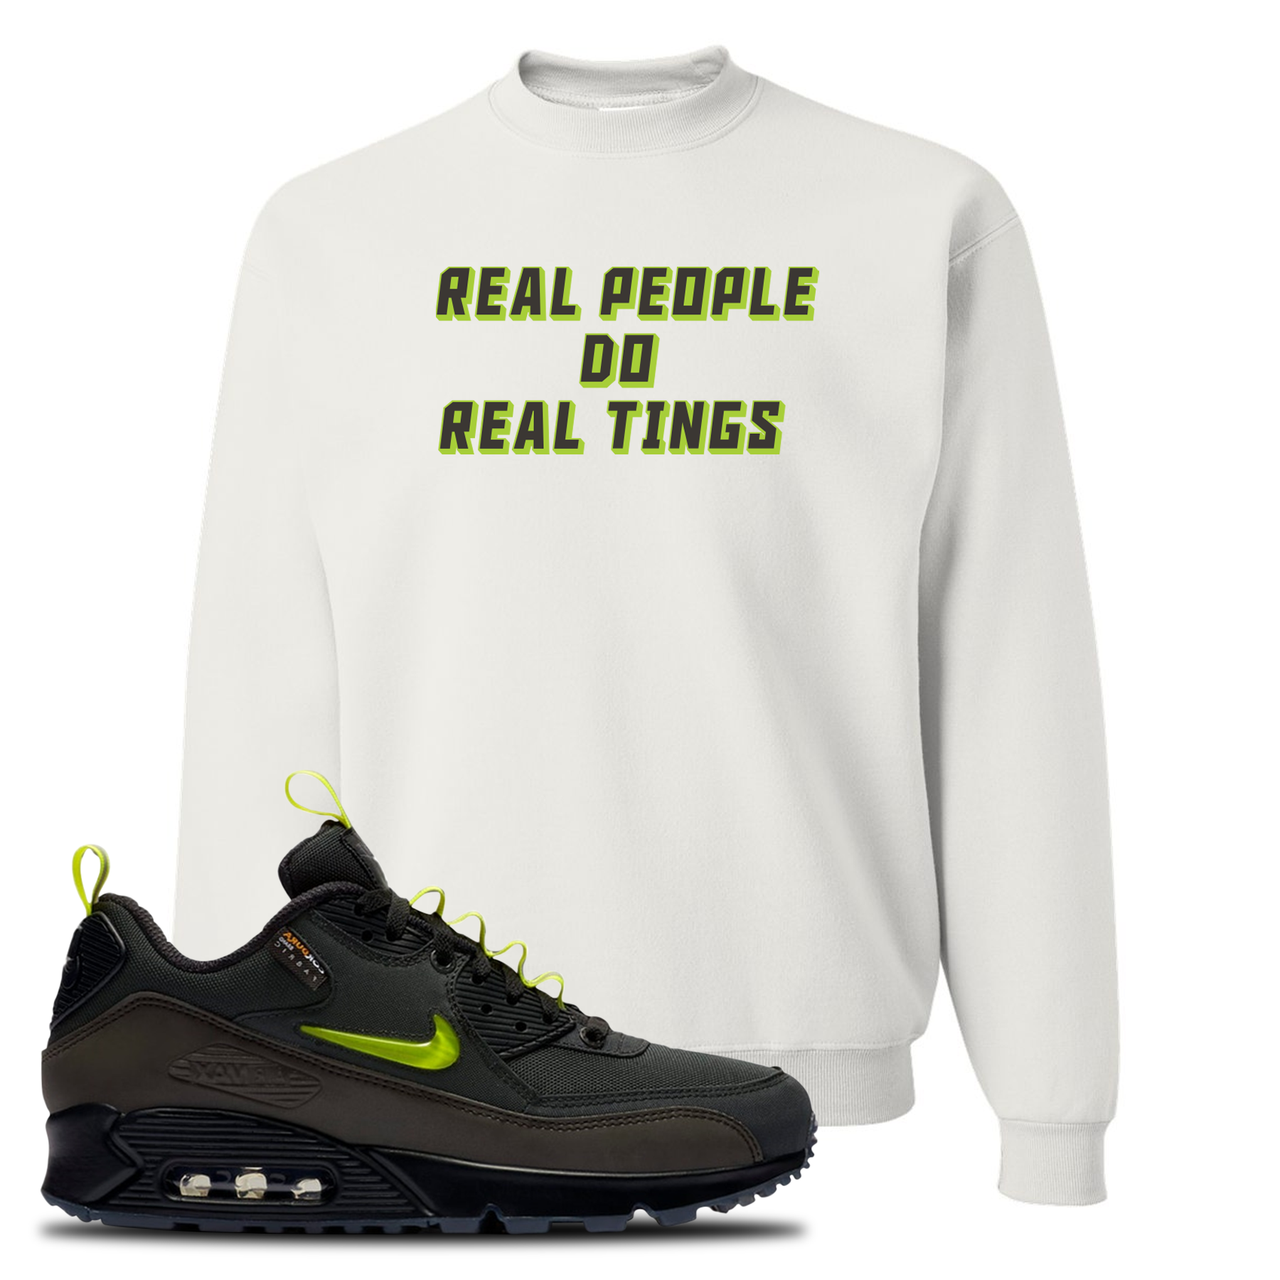 The Basement X Air Max 90 Manchester Real People Do Real Things White Sneaker Hook Up Crewneck Sweatshirt